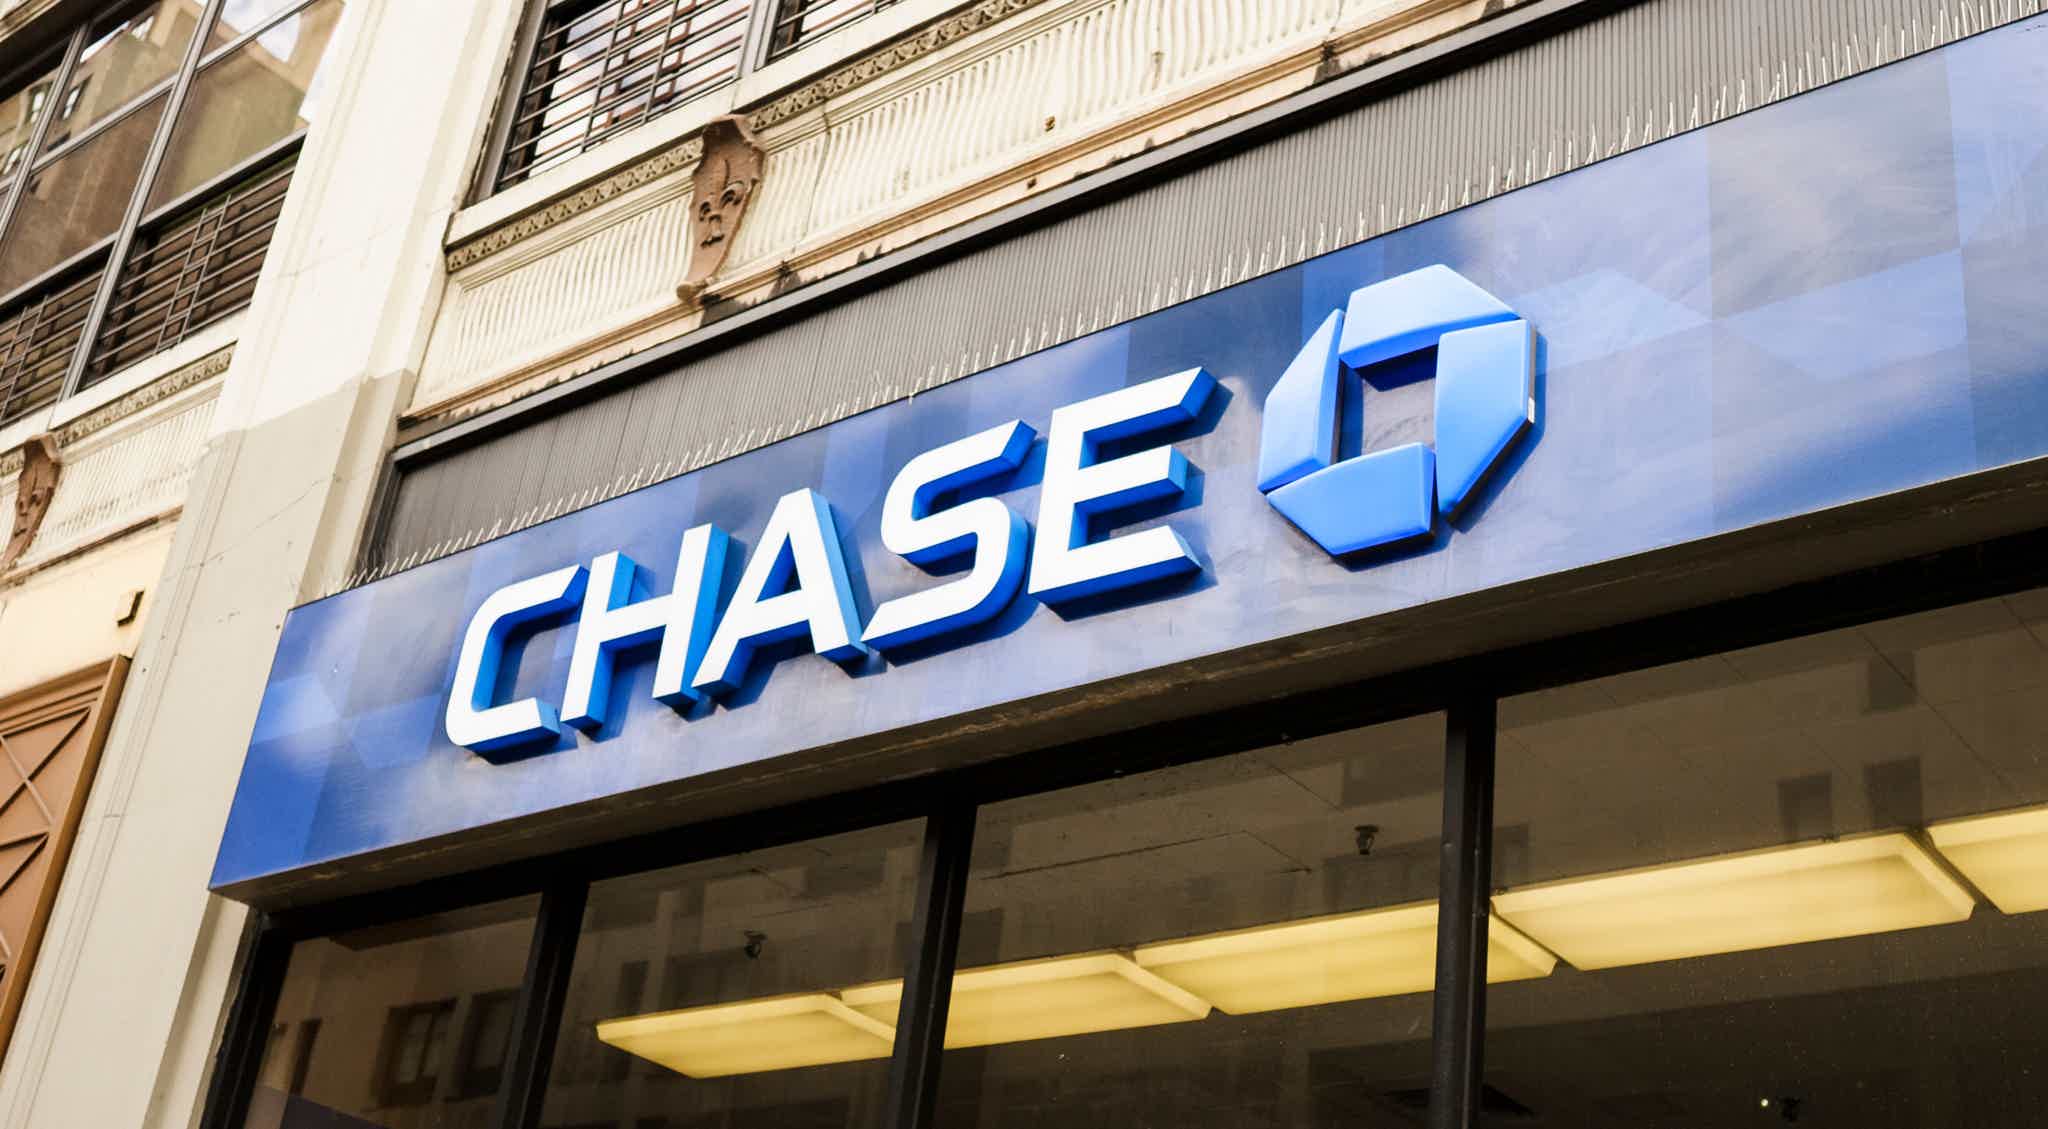 Open your account and start banking with Chase. Source: Adobe Stock.